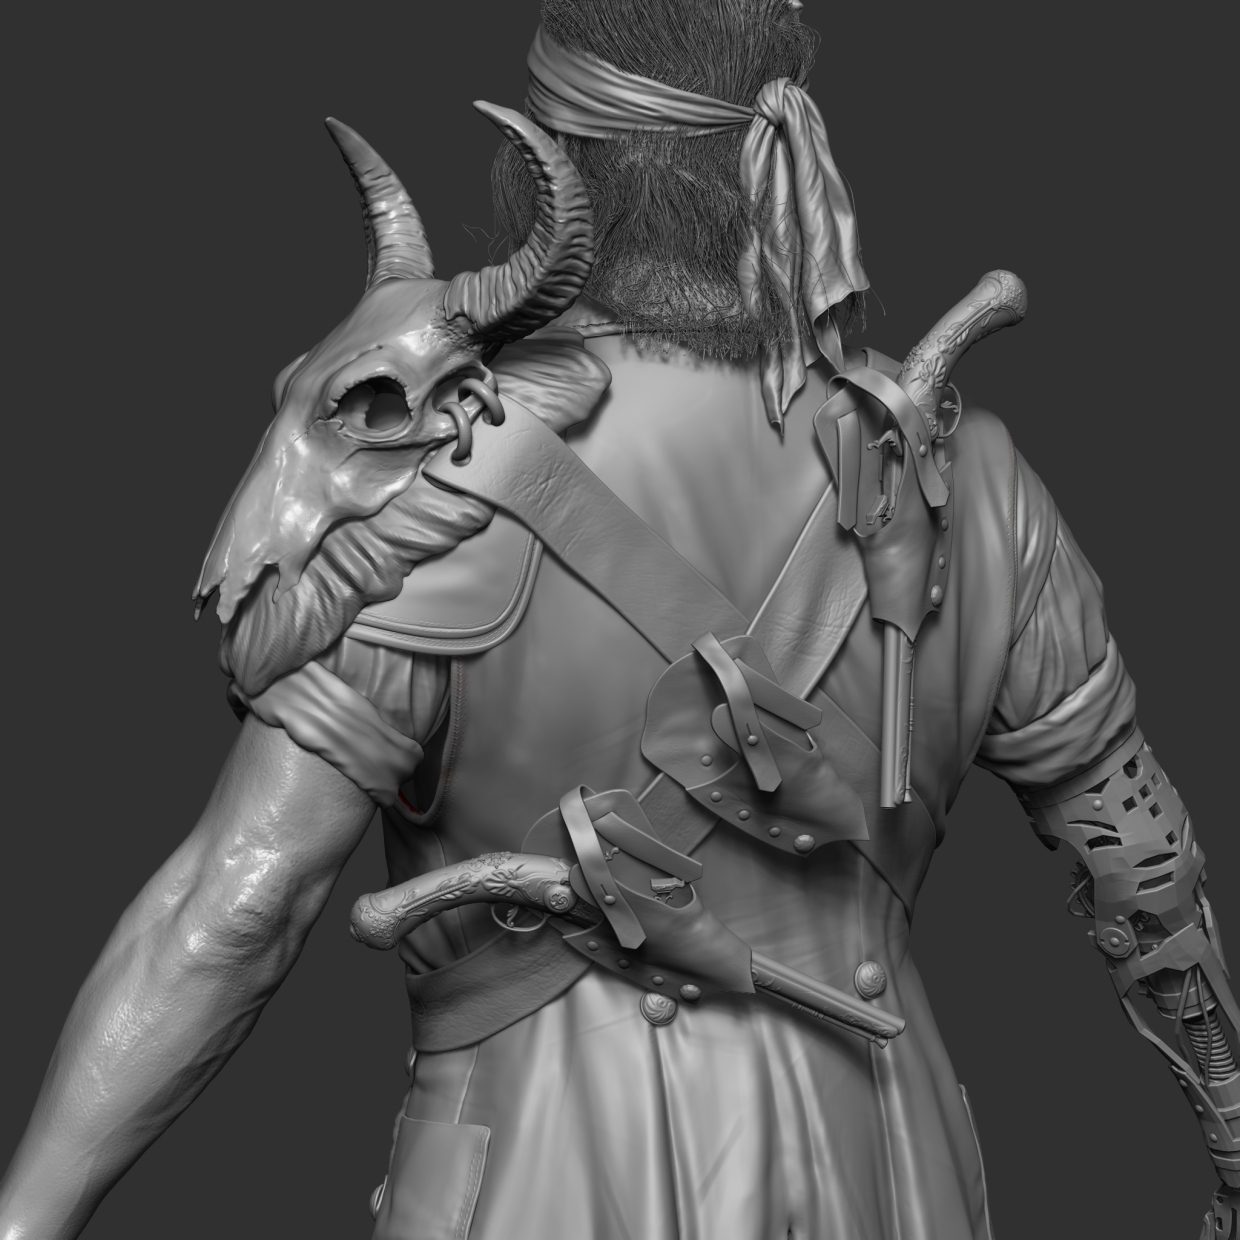 trustworthy place to pirate zbrush